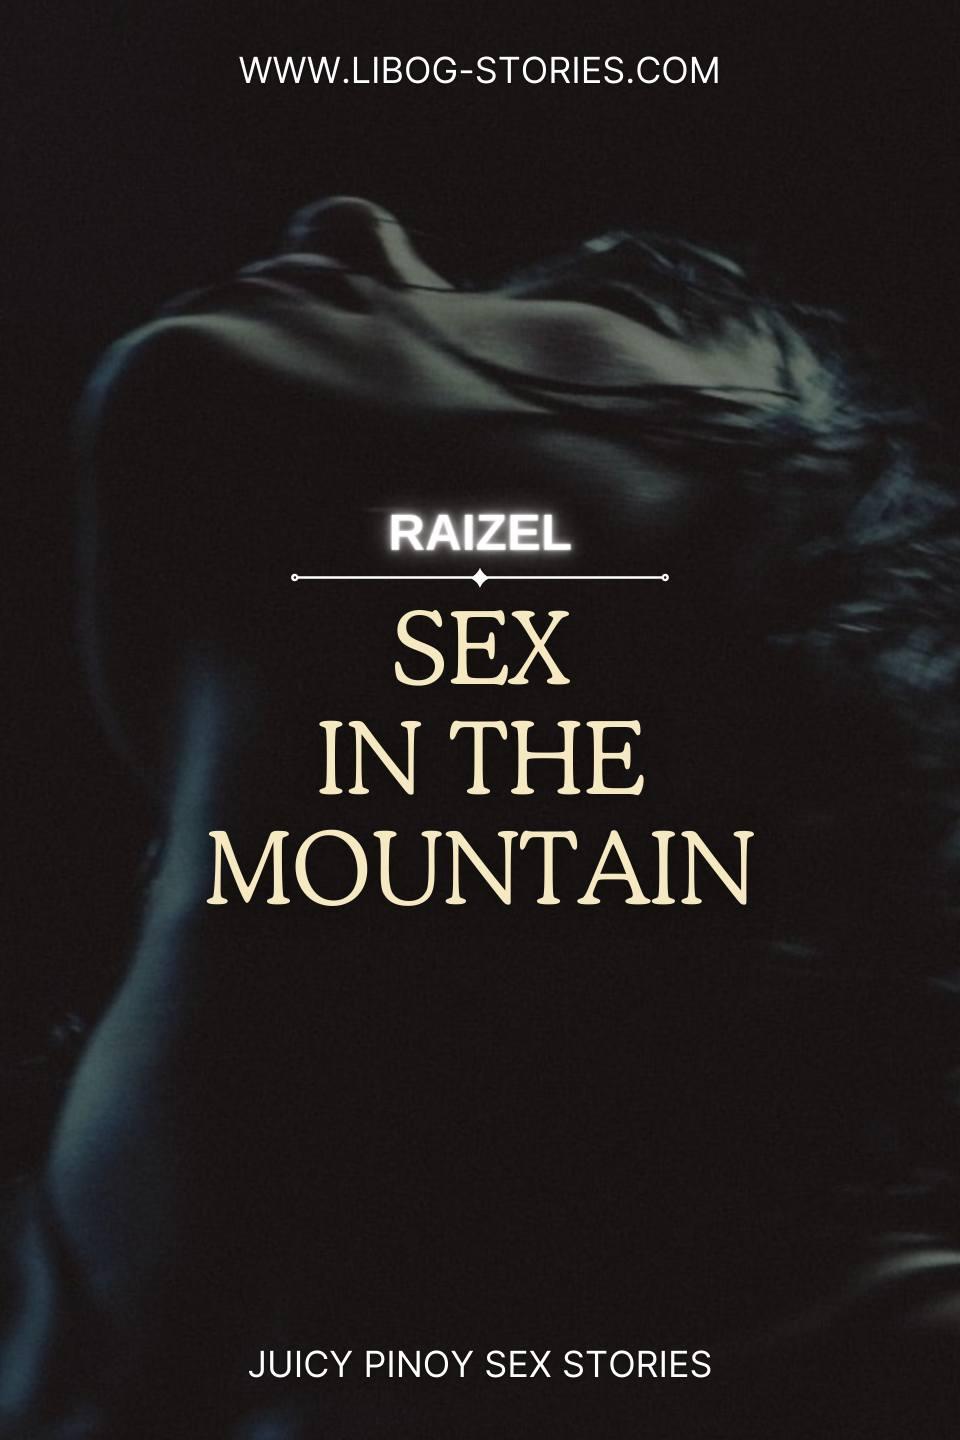 SEX IN THE MOUNTAIN